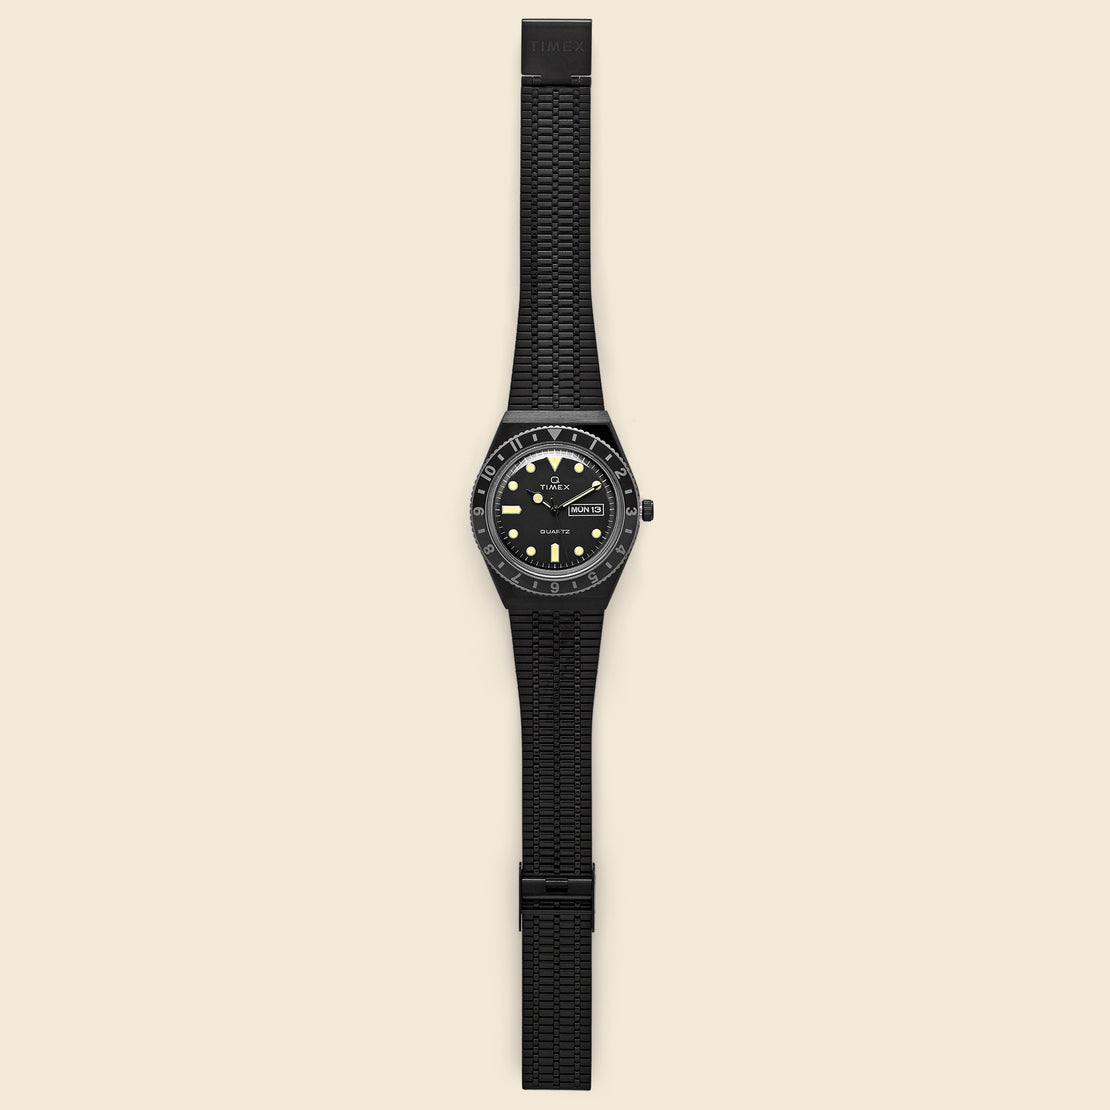 Q Stainless Steel Watch 38mm - Black/Stainless Steel Black - Timex - STAG Provisions - Accessories - Watches